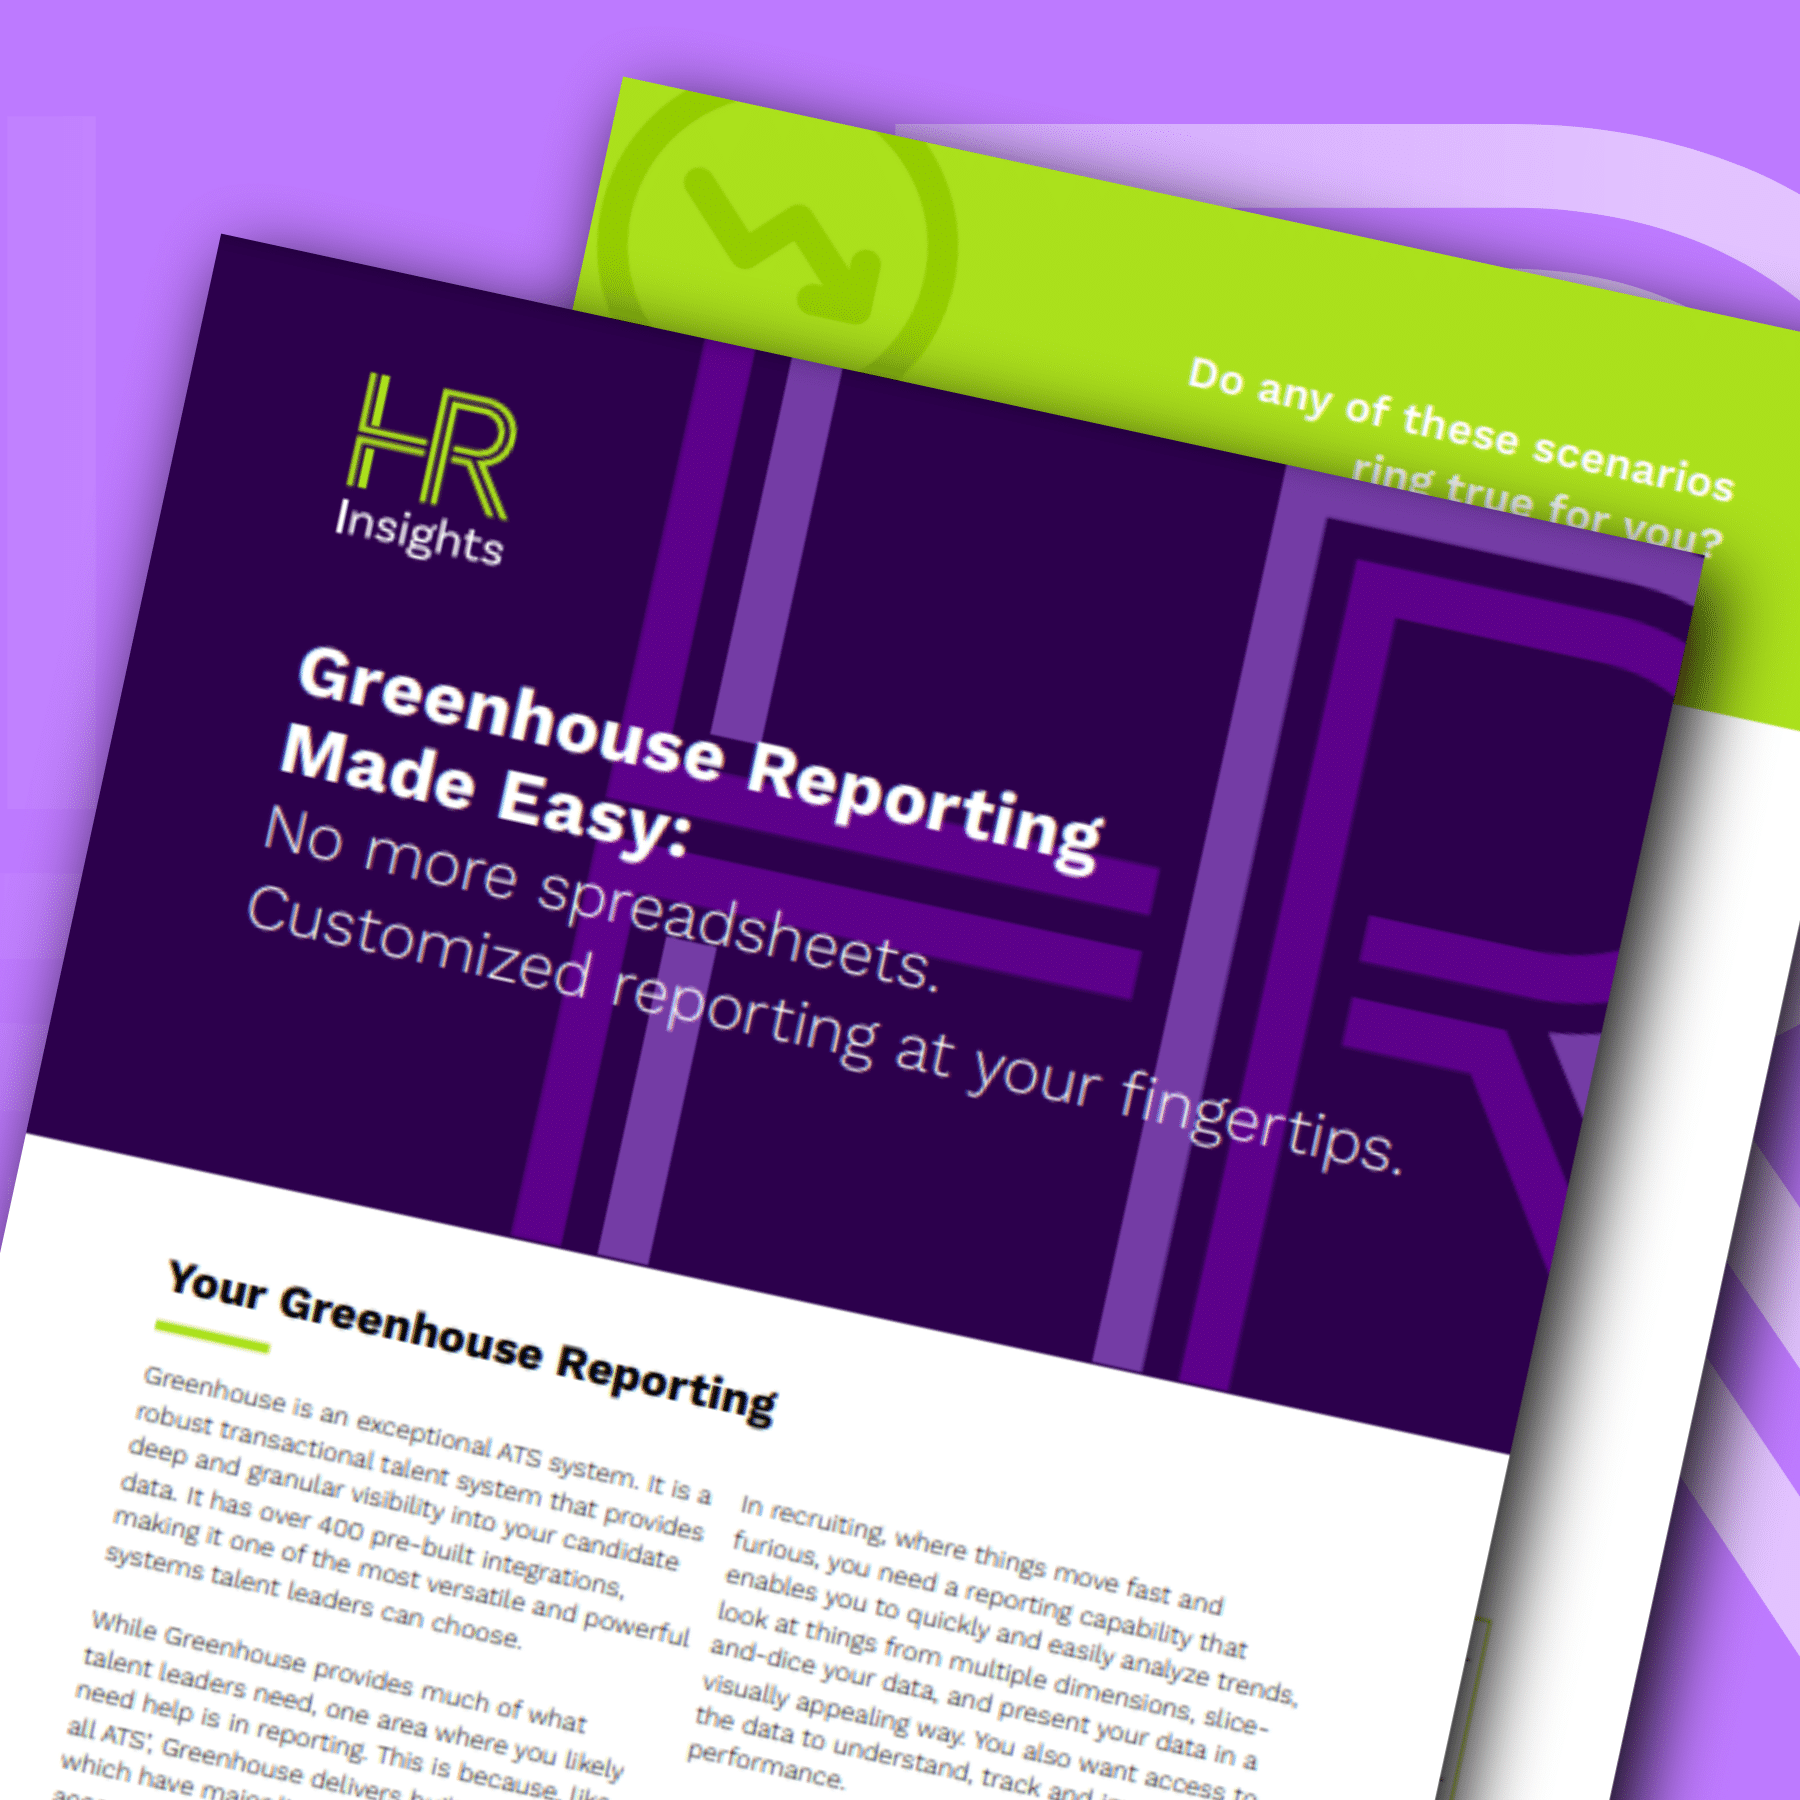 Greenhouse reporting made easy whitepaper thumbnail